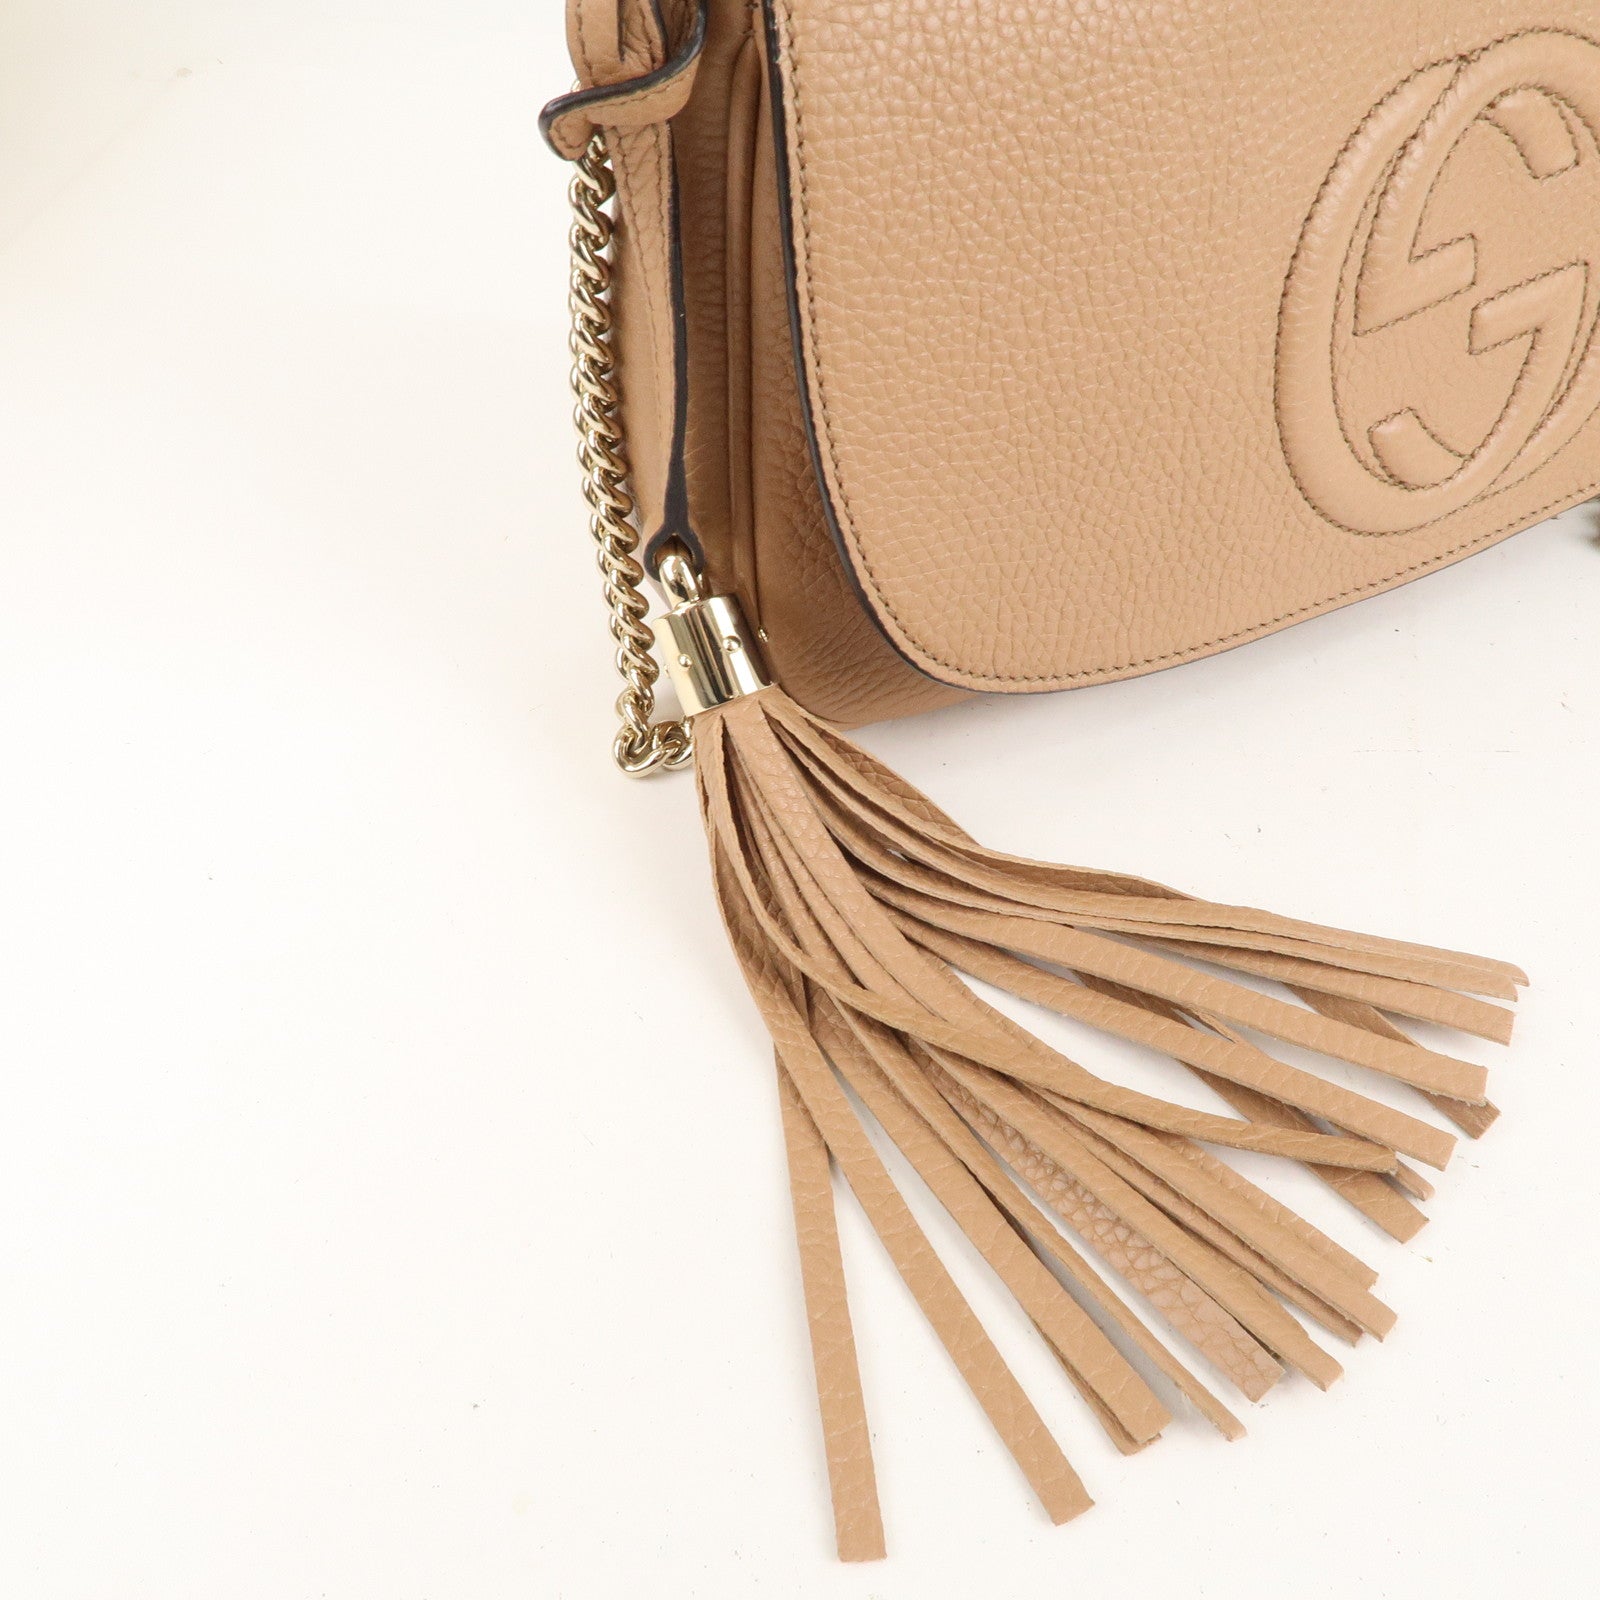 Gucci Soho Leather Wallet On Chain Crossbody Bag Brown